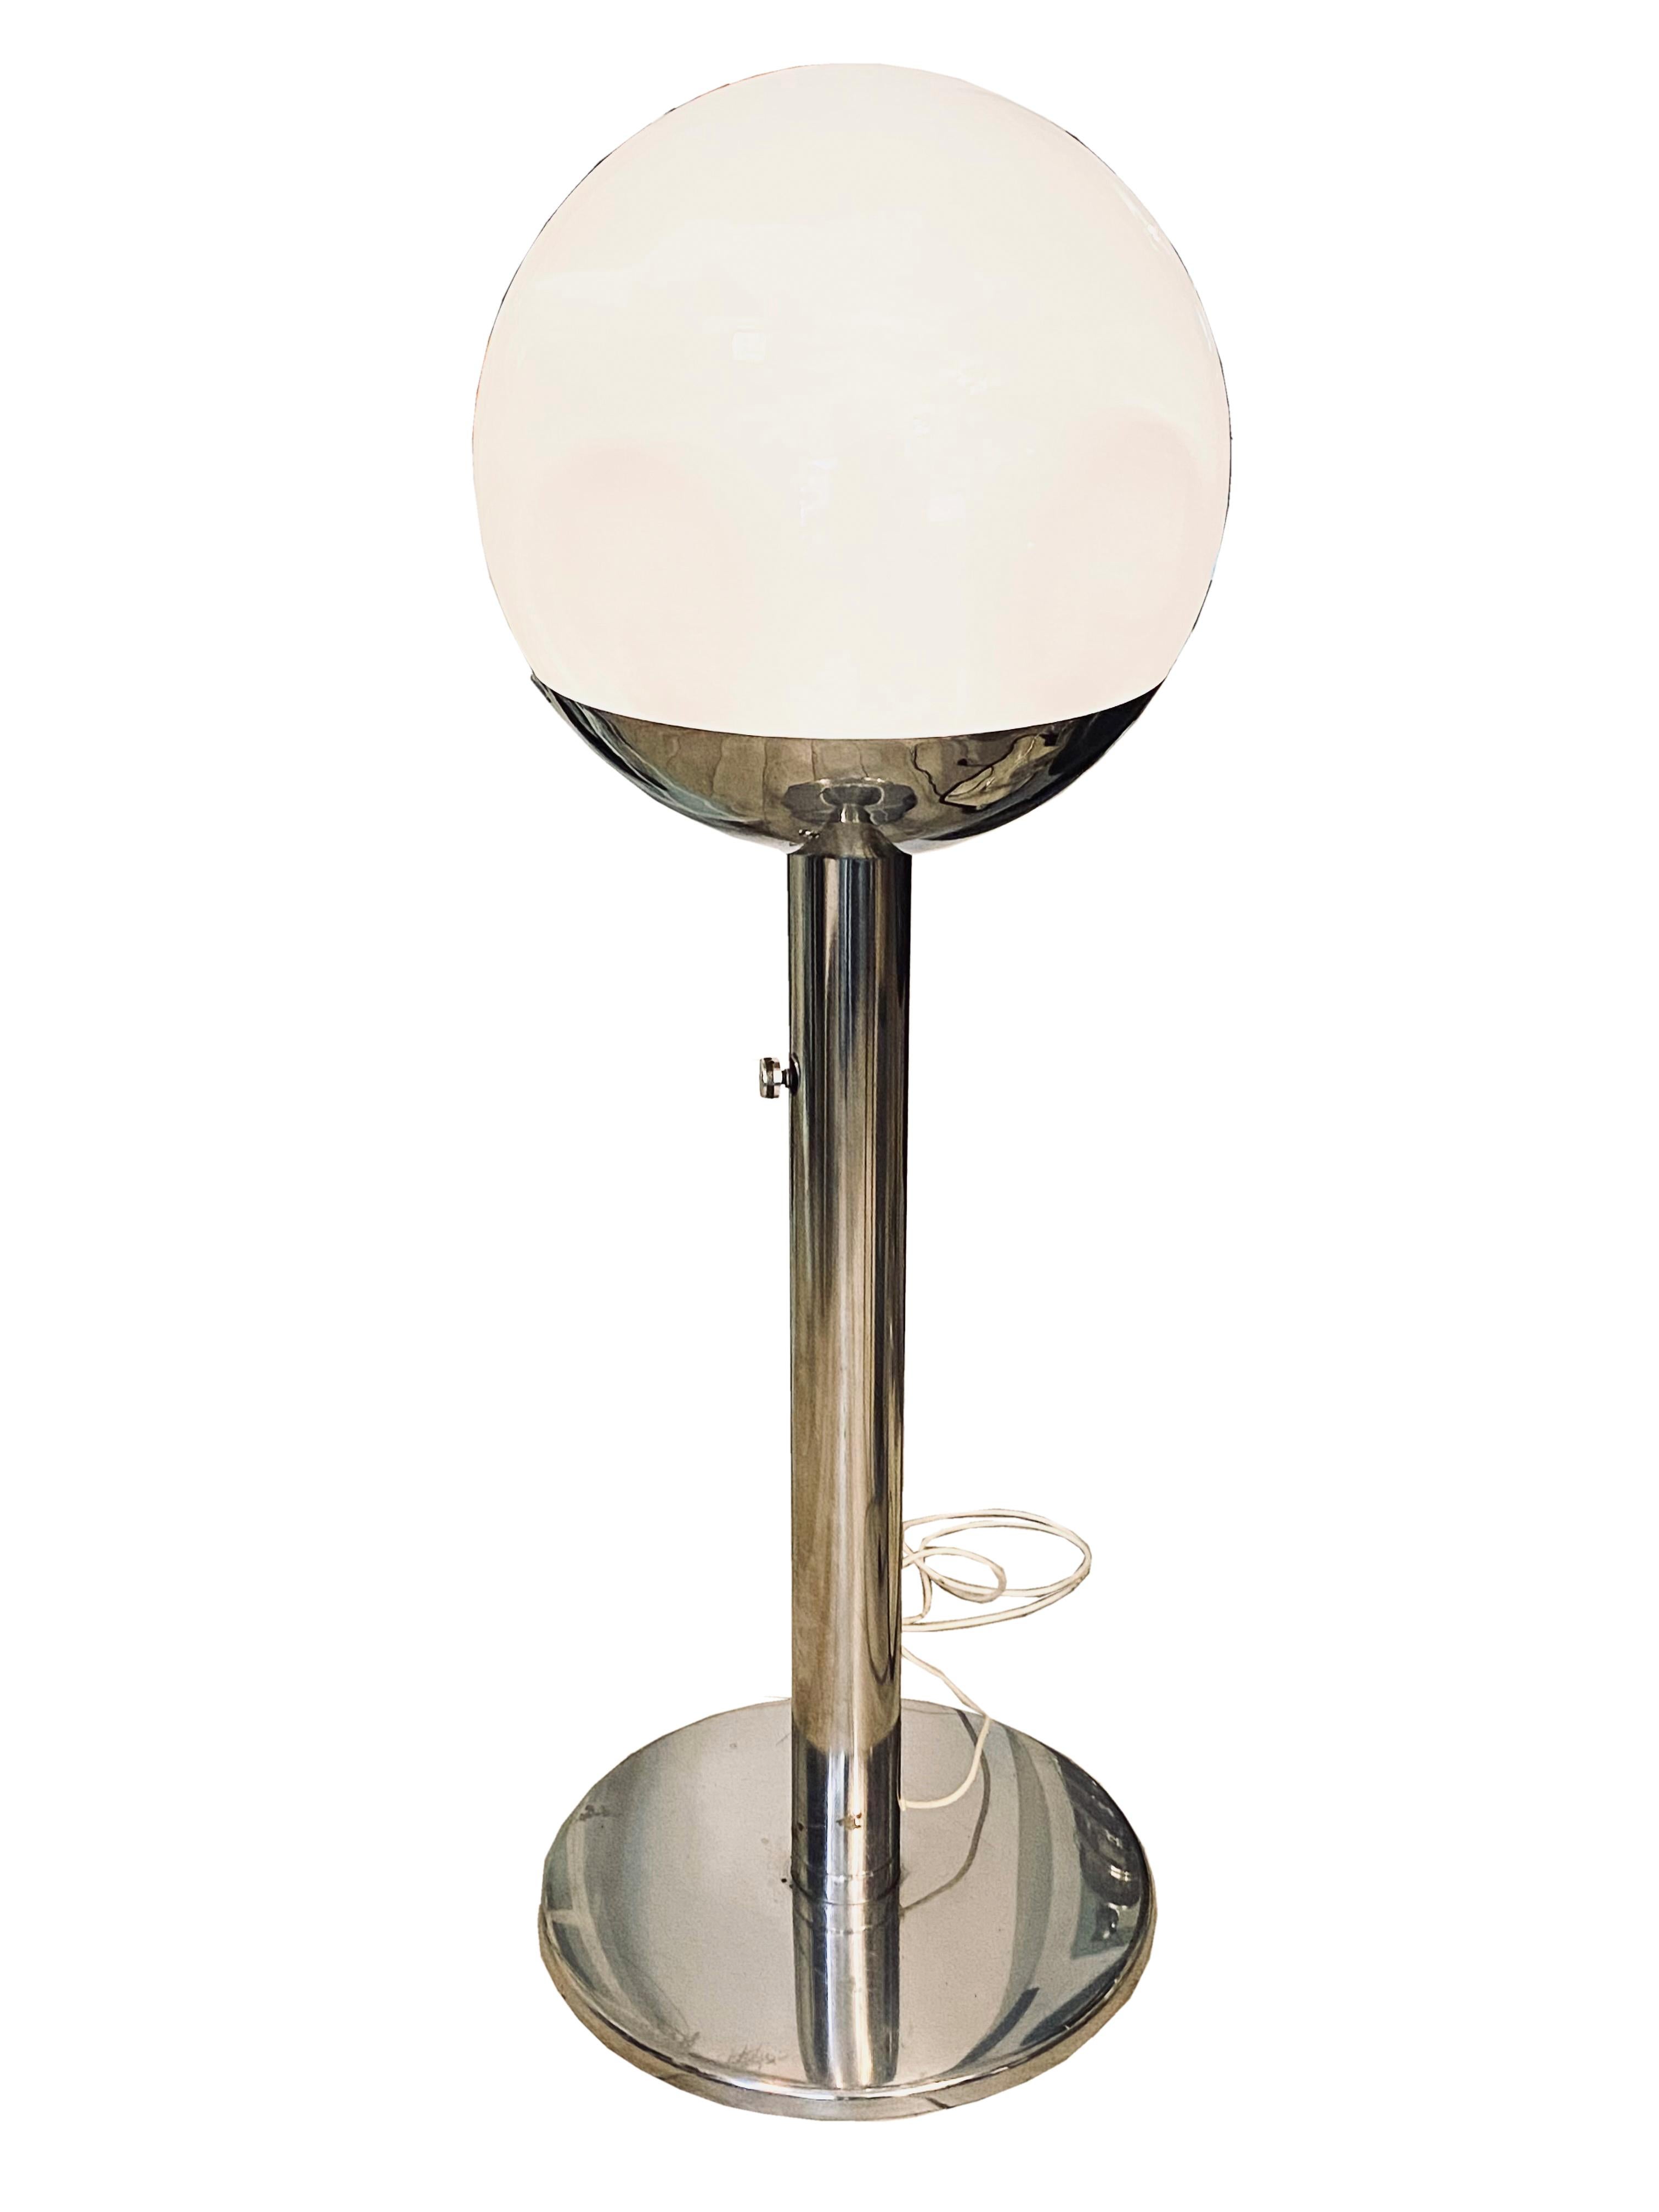 Late 20th Century Pia Guidetti Crippa for Luci Glass and Chrome Italian Mod.P428 Floor Lamp, 1970 For Sale